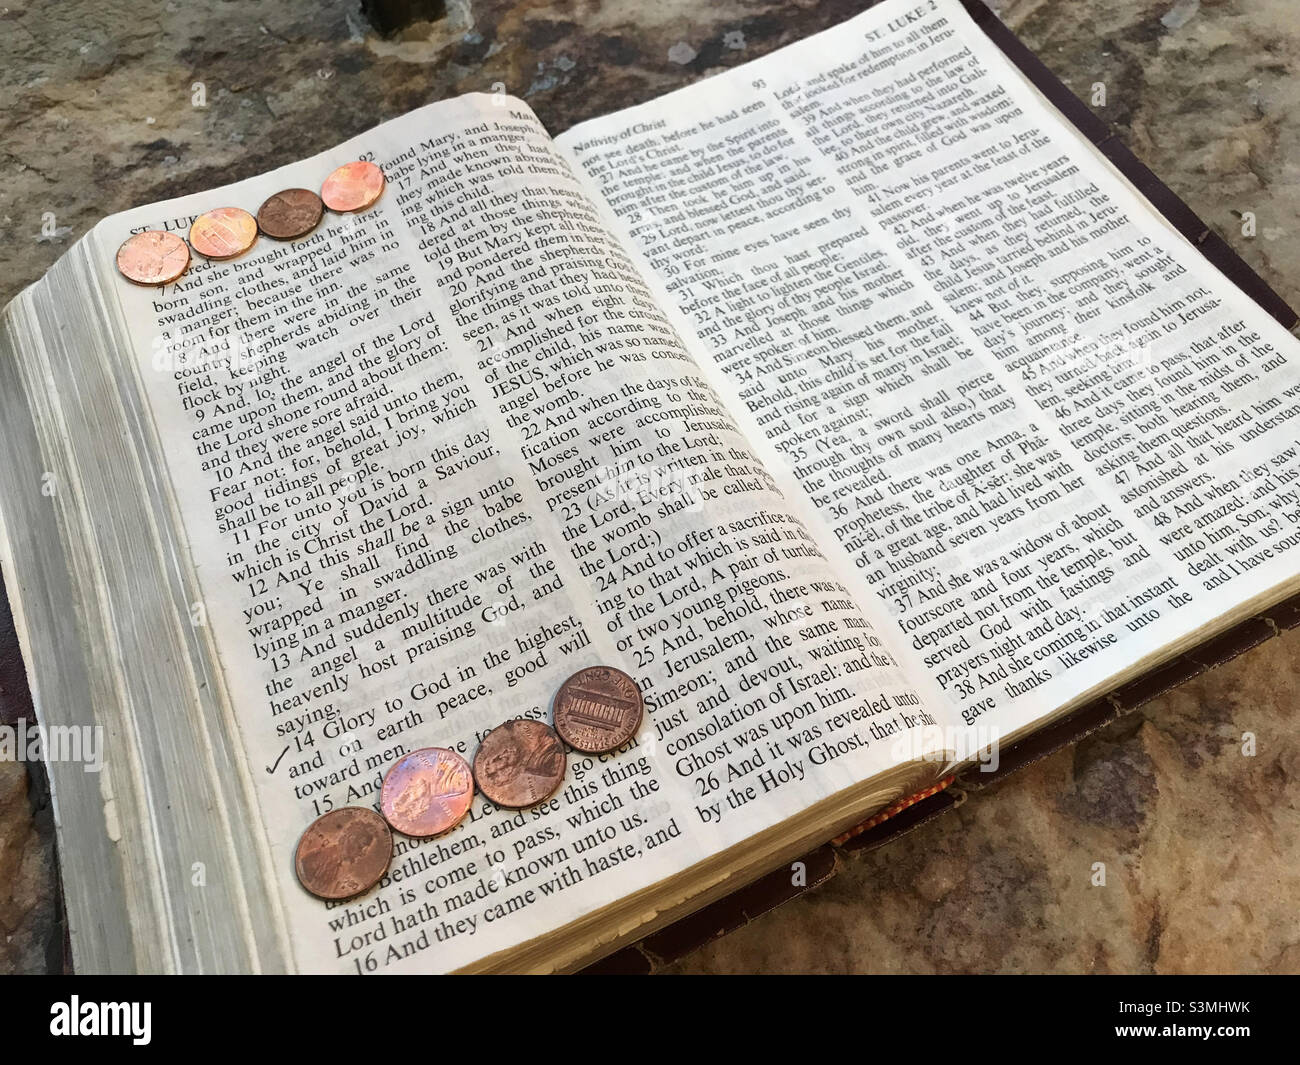 opened Bible turned to the New Testament chapter of Saint Luke. Stock Photo